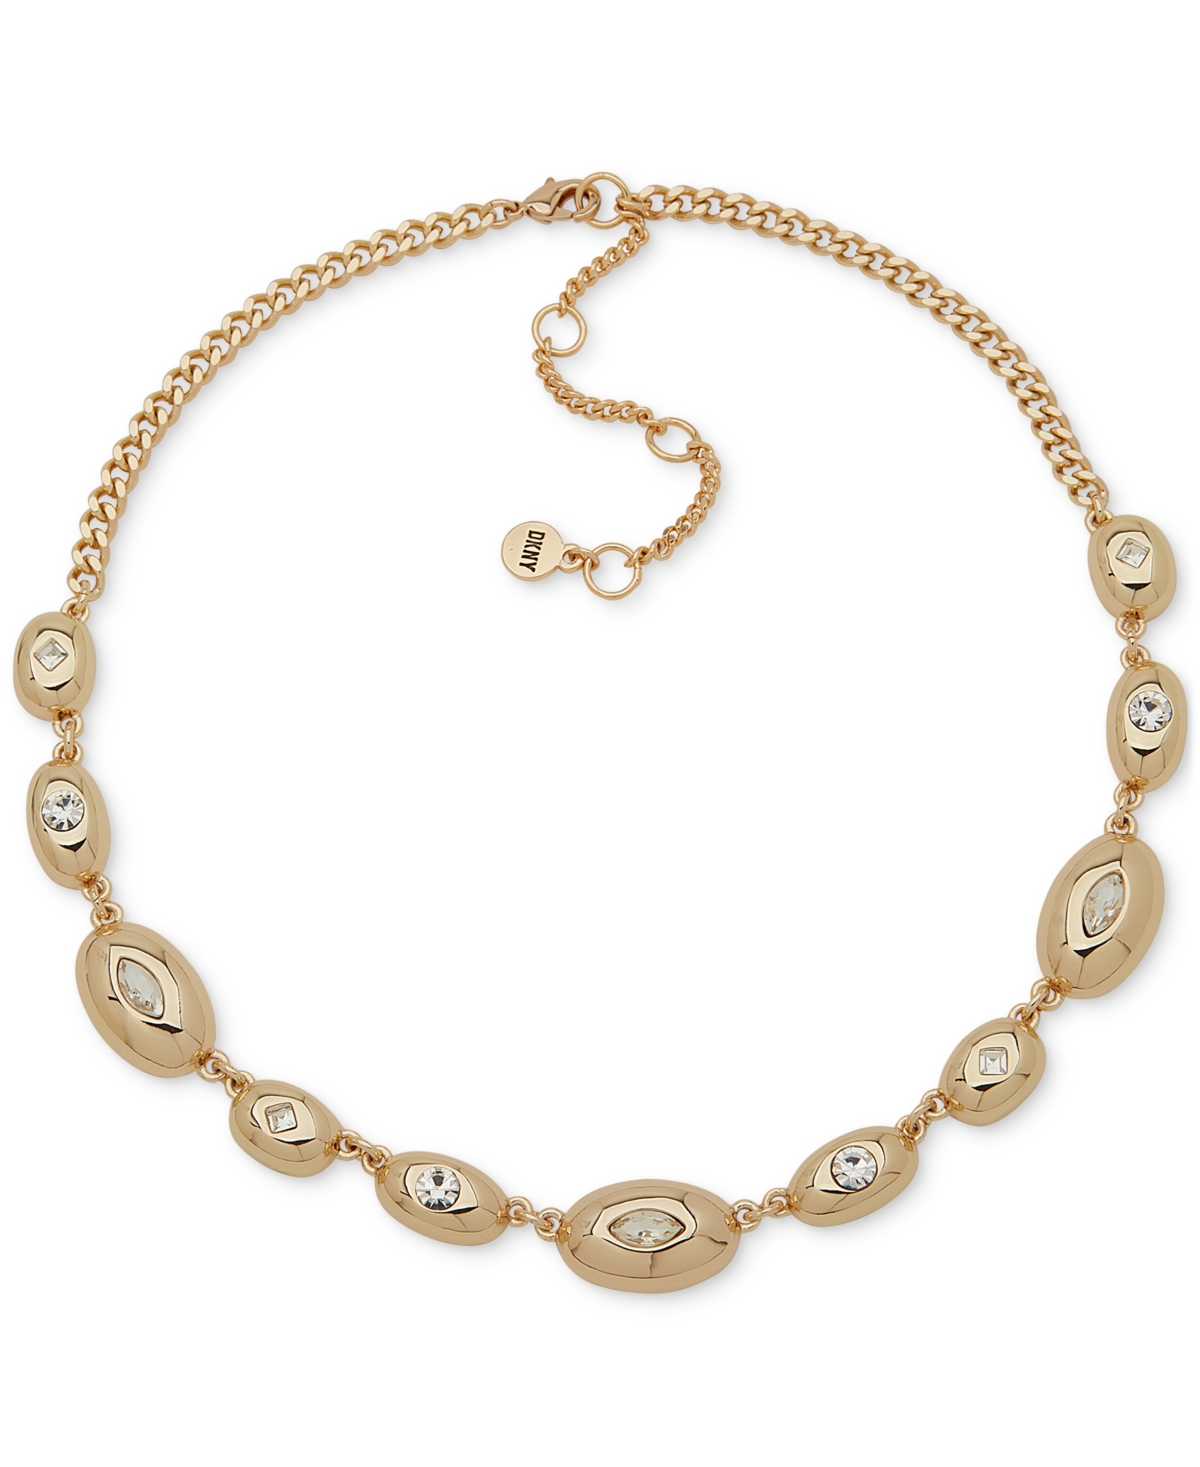 Gold-Tone Mixed Crystal Station Collar Necklace, 16" + 3" extender - GLD/CRY